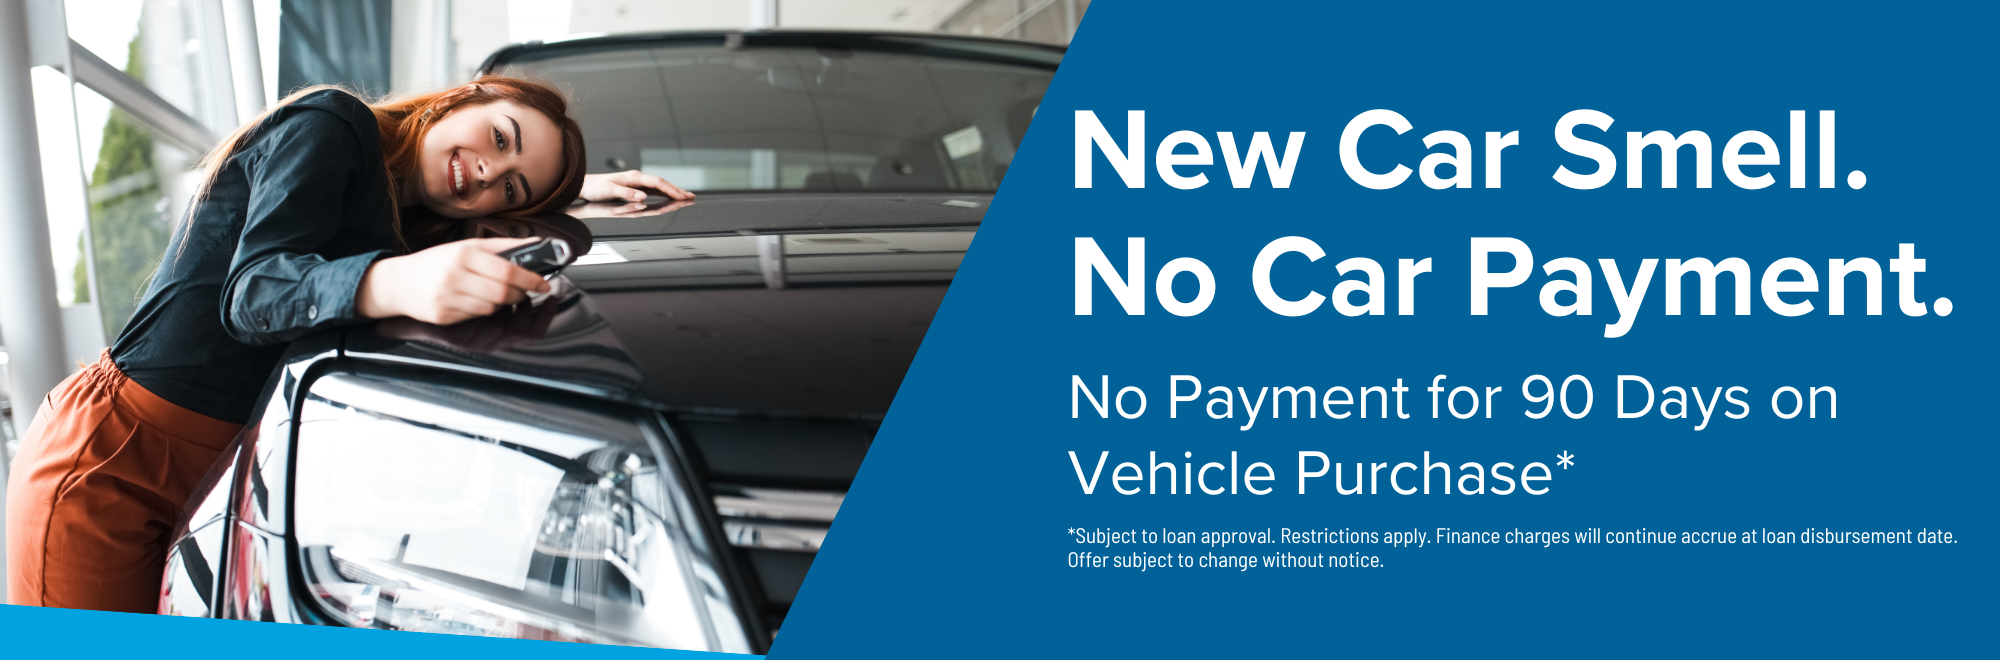 No payment for 90 days with vehicle purchase loan